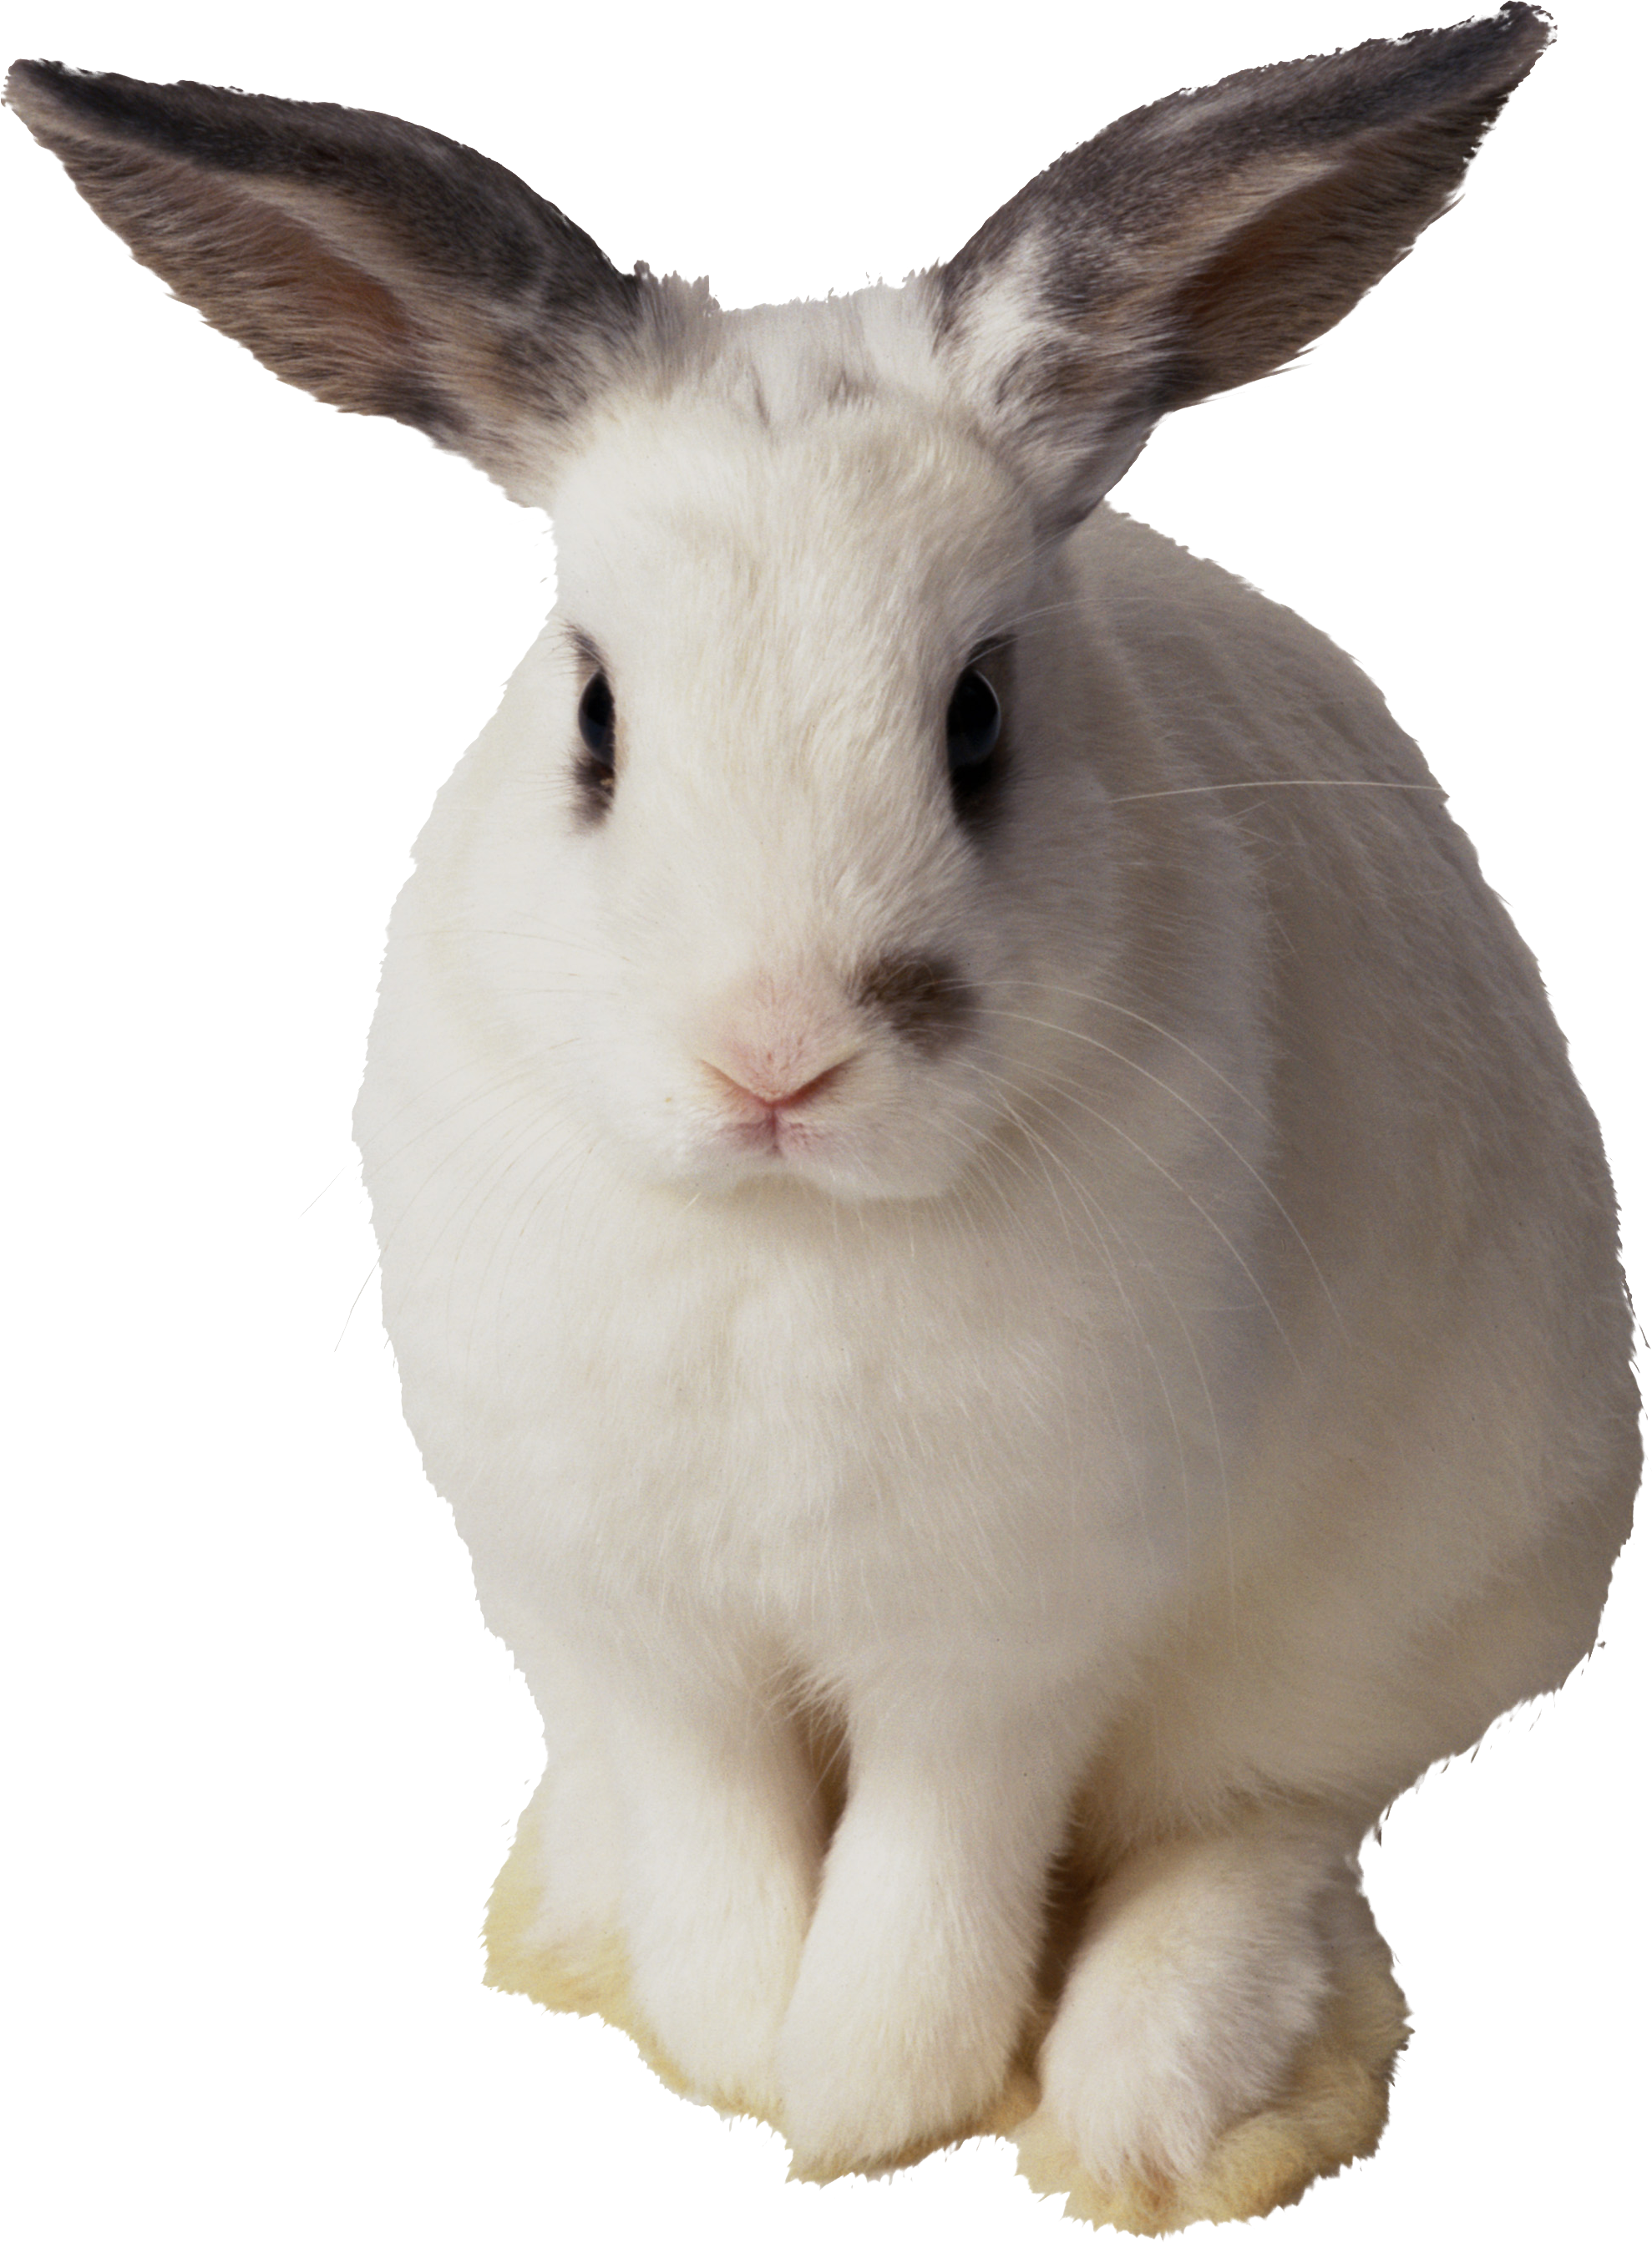 A White Rabbit With Black Background